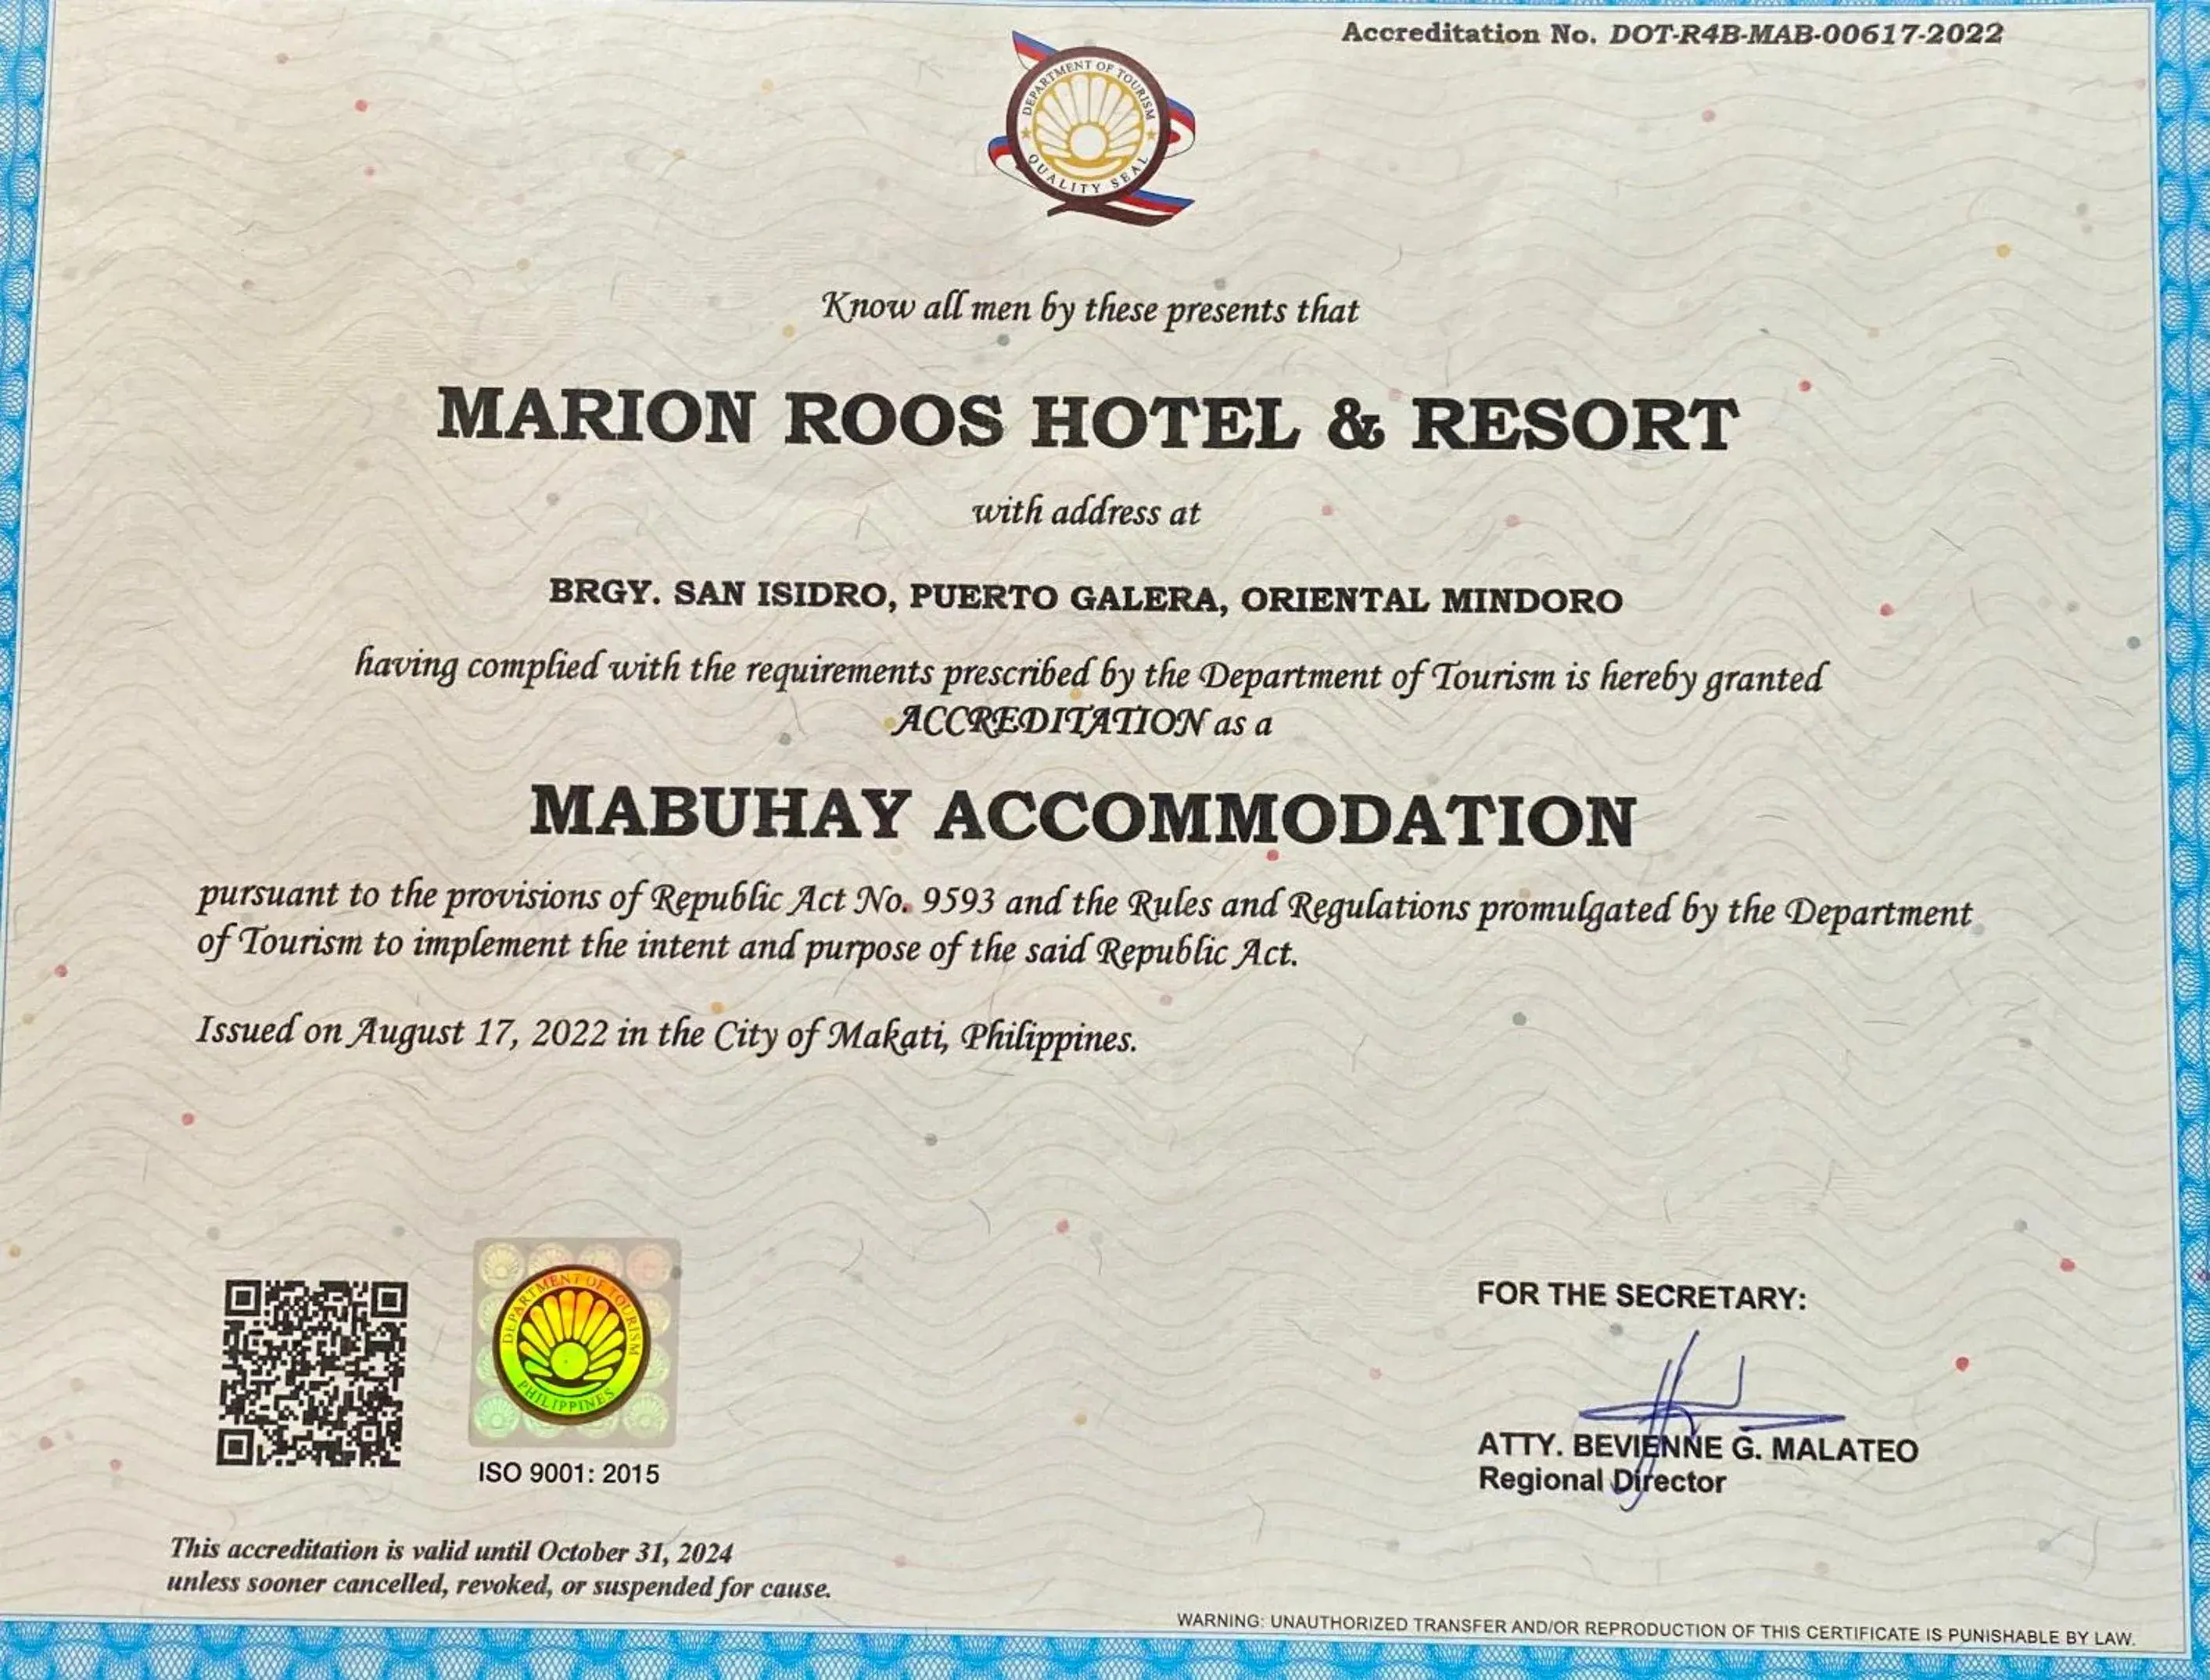 Logo/Certificate/Sign in Marion Roos Hotel